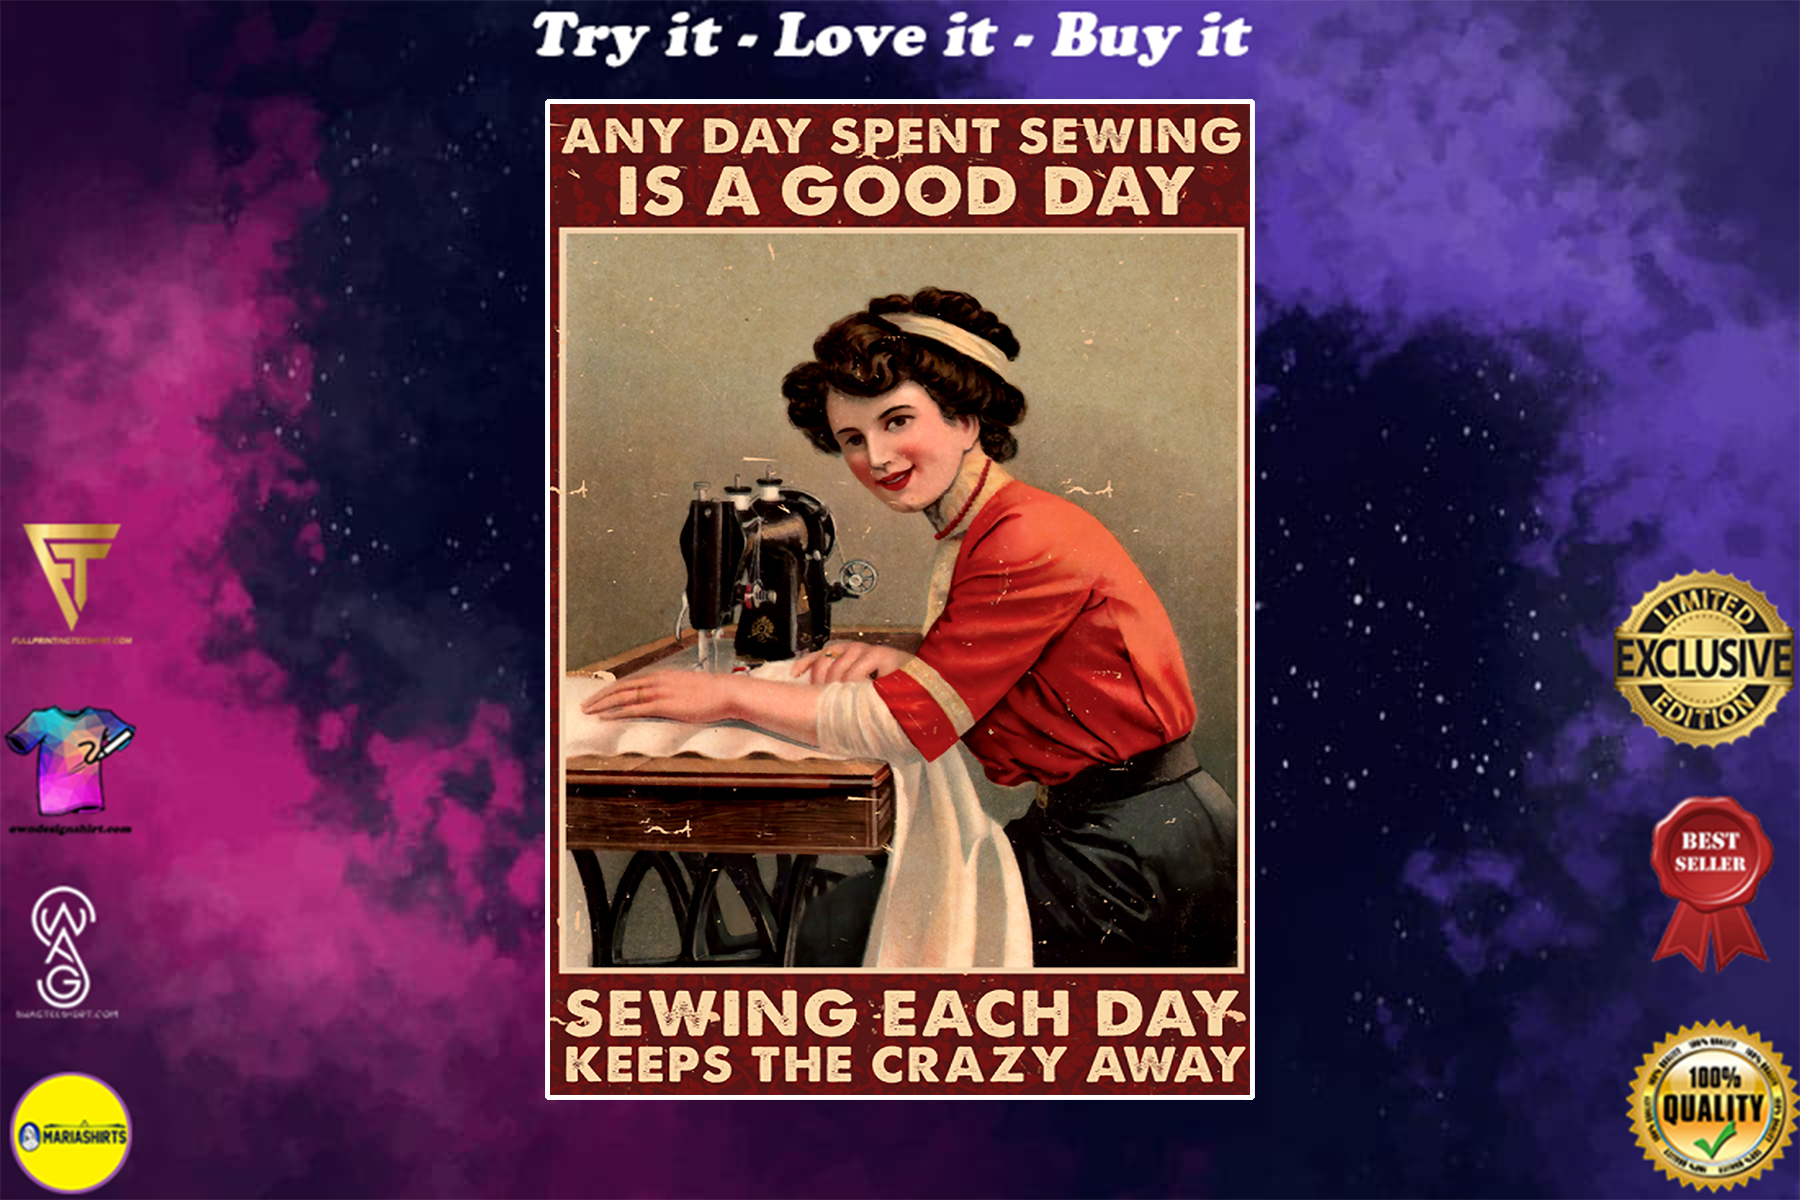 any day spent sewing is a good day sewing each day keeps the crazy away vintage poster